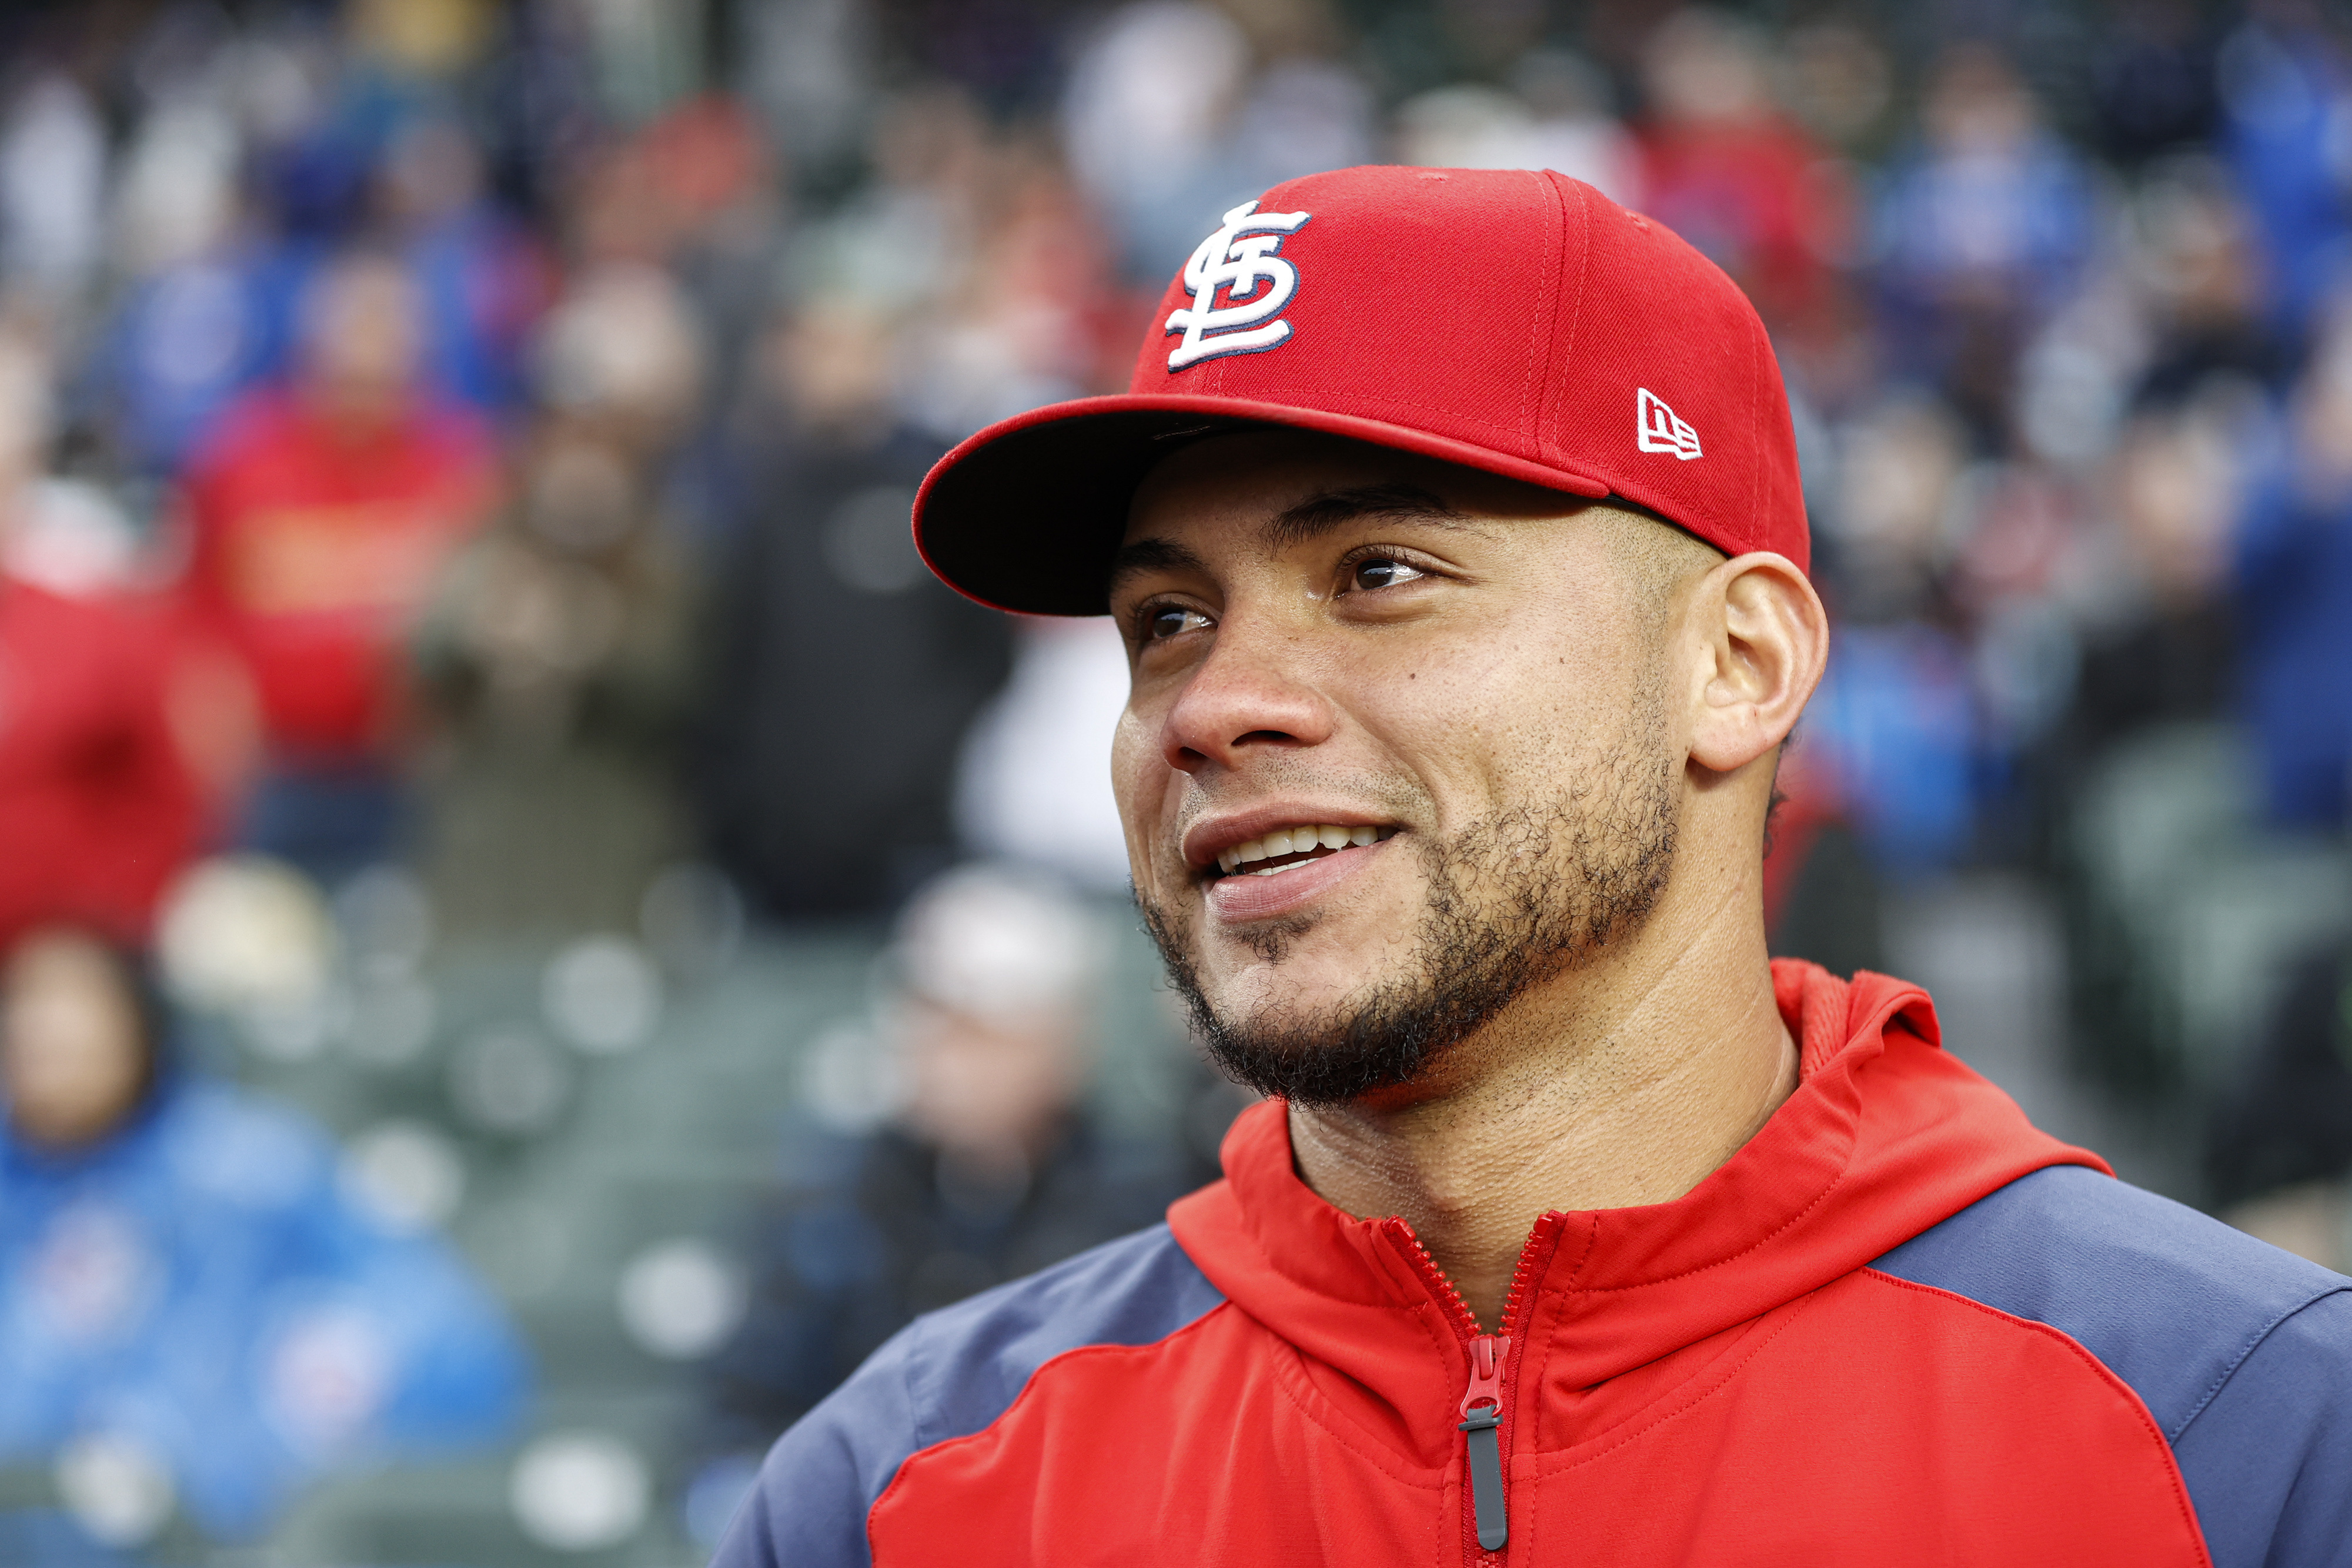 Contreras steps up in return to Wrigley to lead Cardinals over Cubs, 3-1  Midwest News - Bally Sports